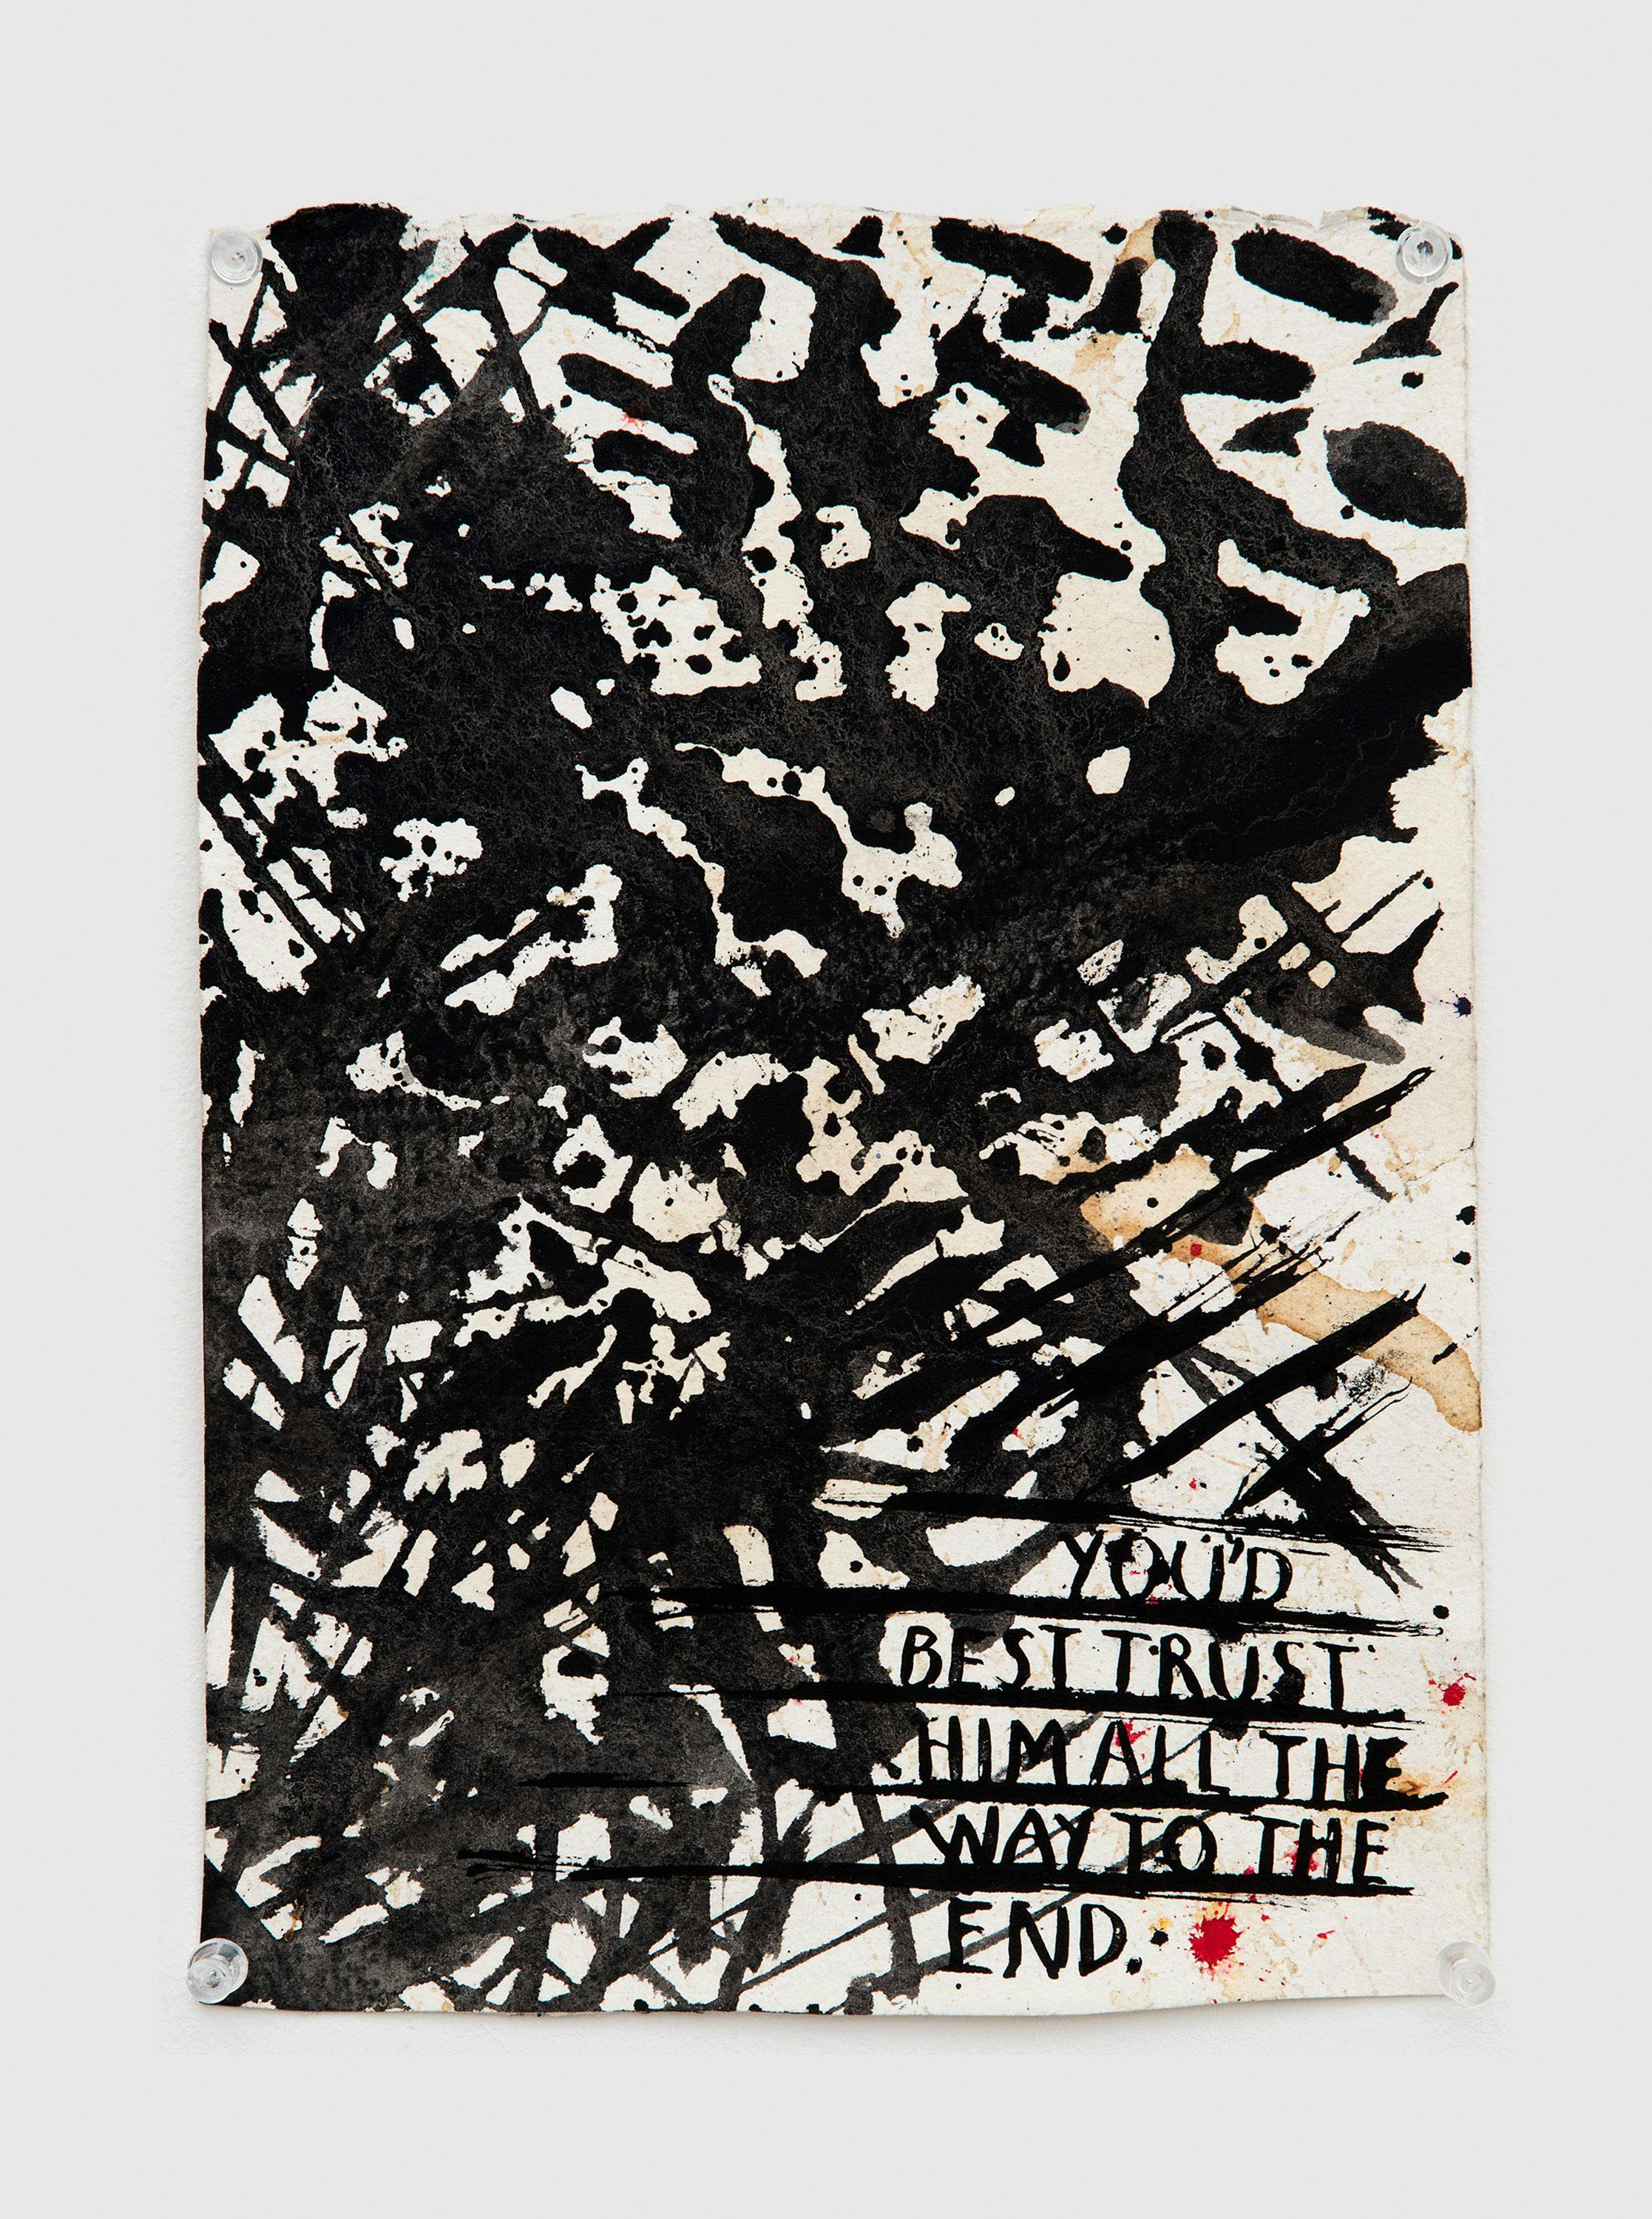 A work on paper by Raymond Pettibon, titled No Title (You'd best trust...), dated 2005.